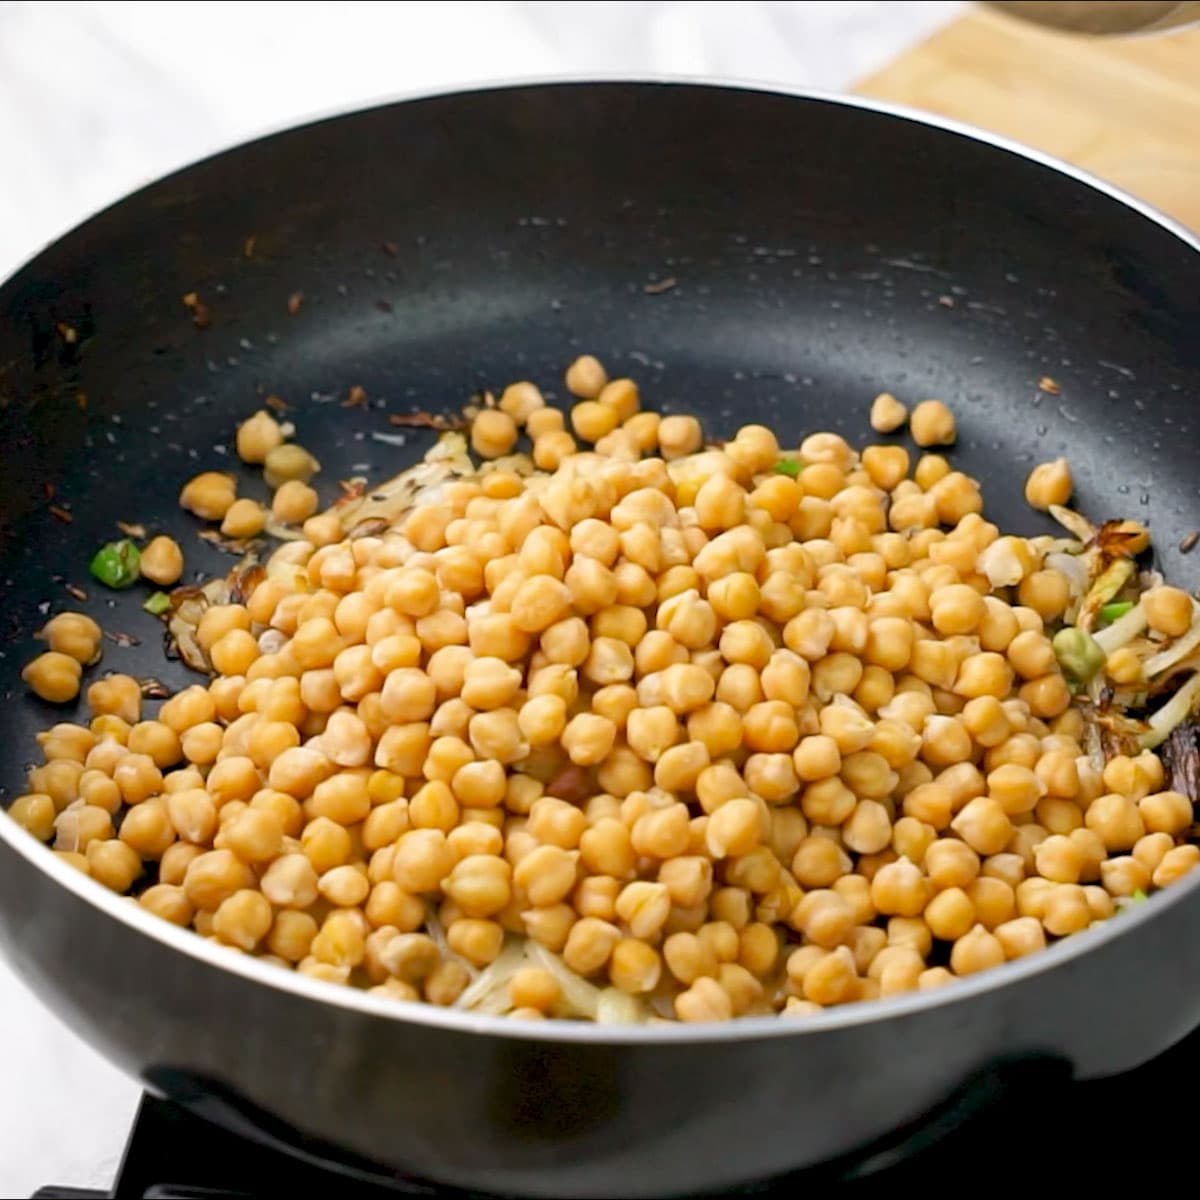 Adding boiled Chickpeas to the pan